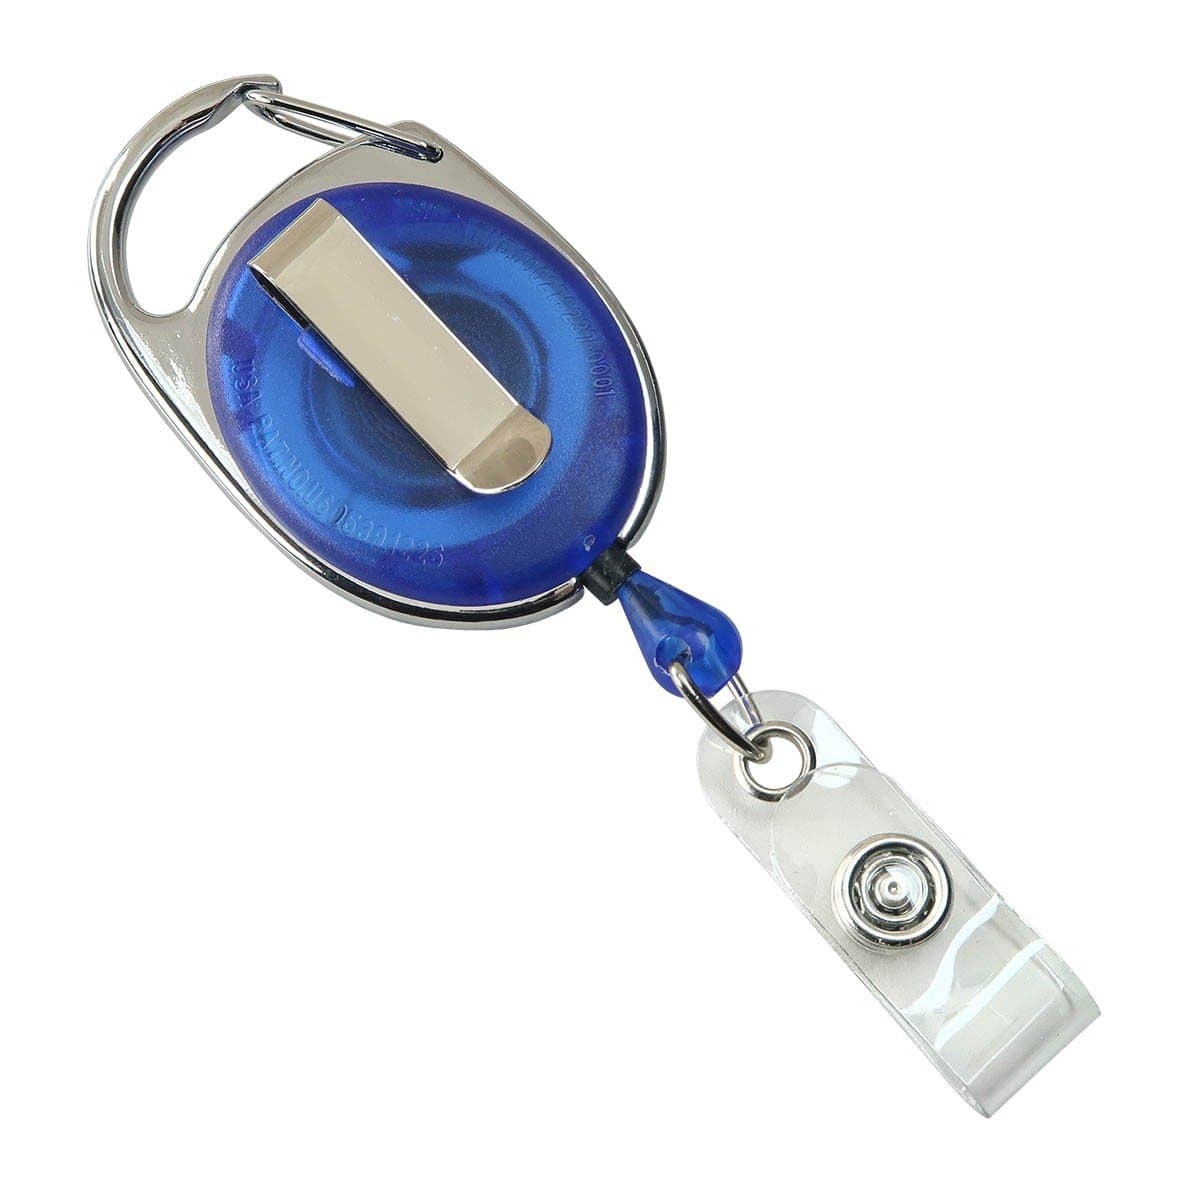 Translucent Blue Premium Oval Badge Reel with Carabiner and Belt Clip (2120-71XX) 2120-7152